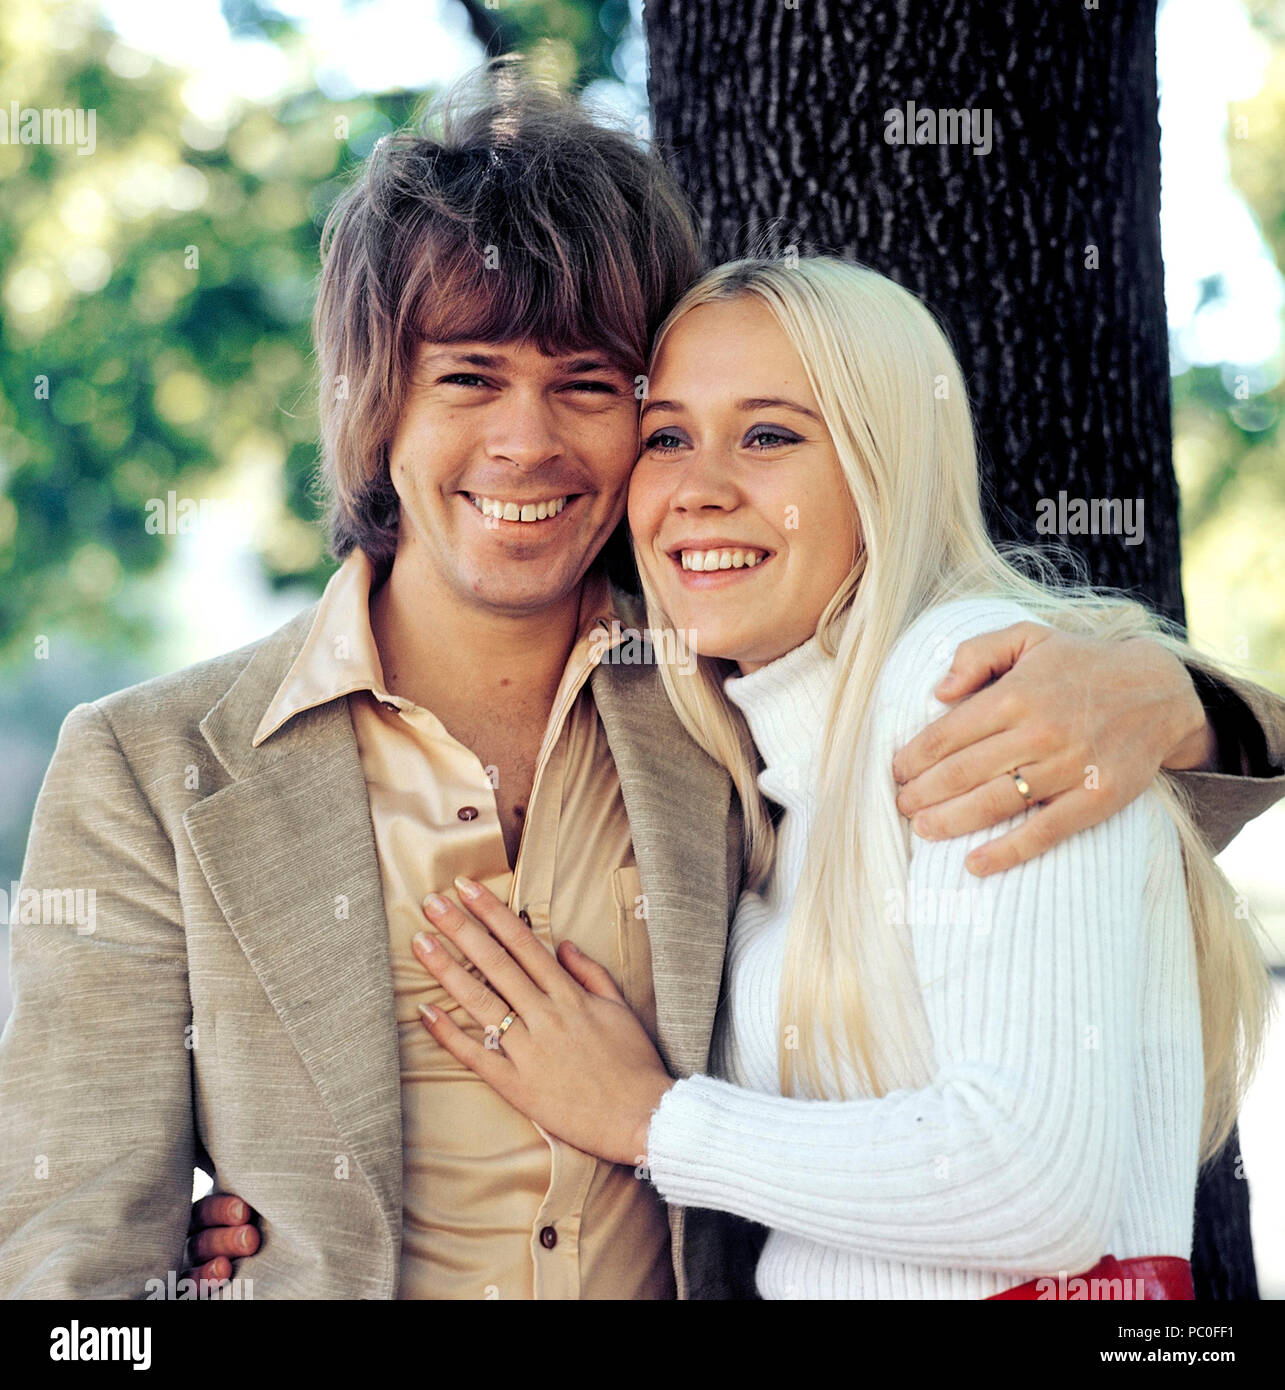 ABBA. Agnetha Fältskog. Singer. Member of the pop group ABBA. Born 1950. Pictured here with her fiance Björn Ulvaeus 1970 whom she married on 6 July 1971. Photo: Kristoffersson Stock Photo